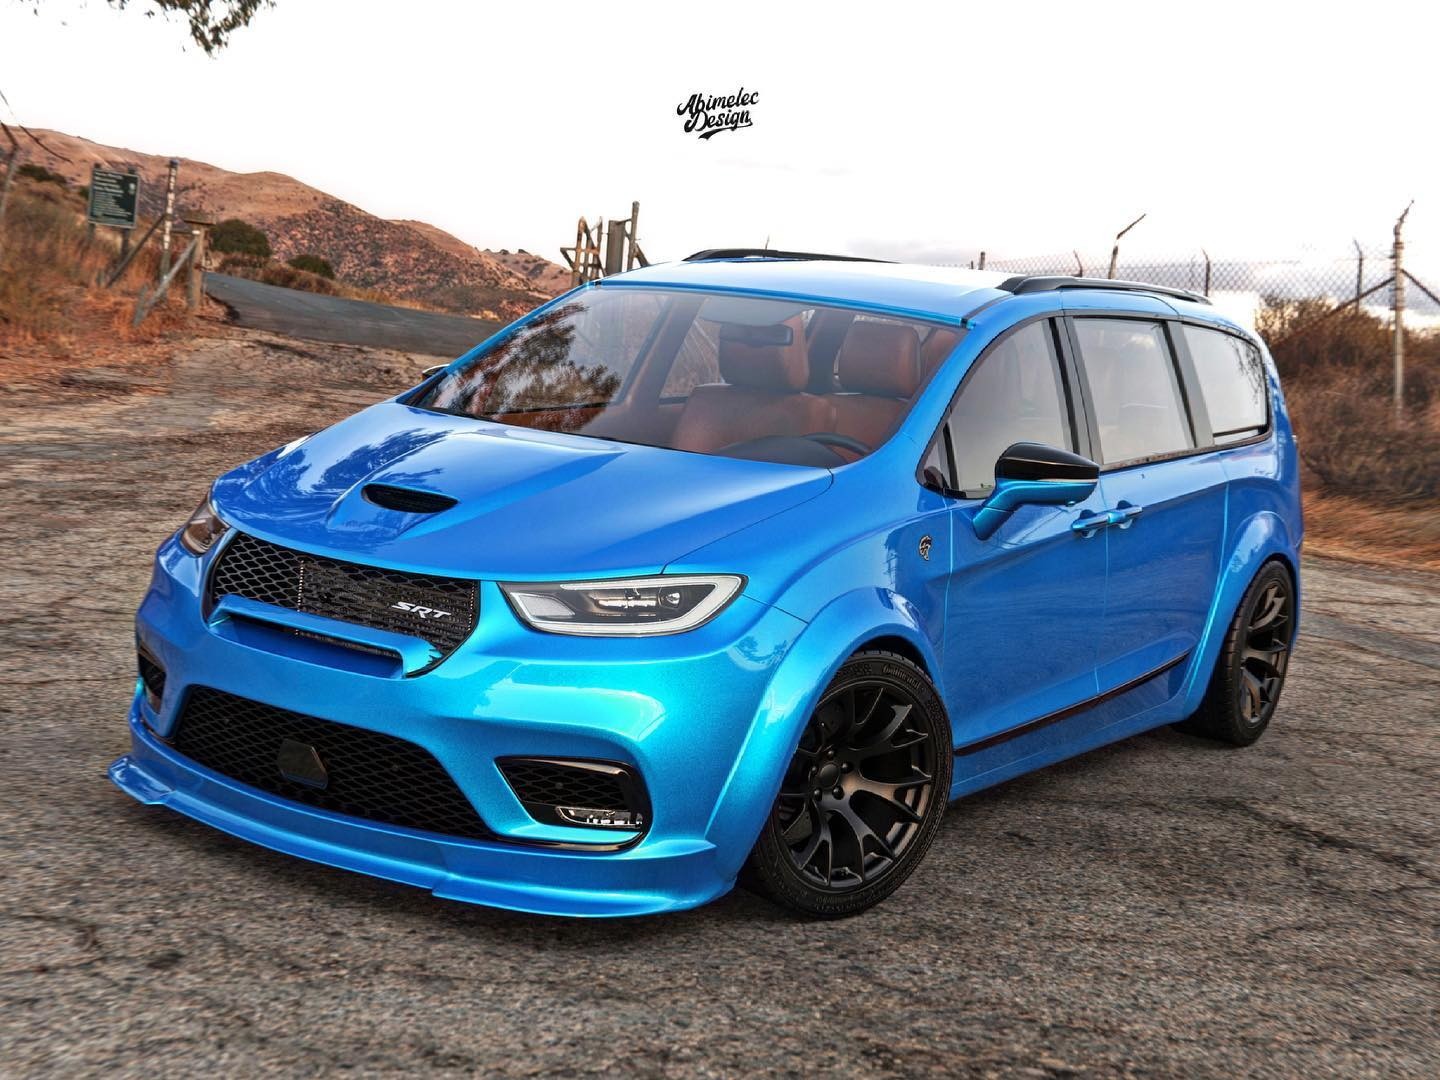 Chrysler Pacifica Hellcat Is Coming This Year for the Ultimate Family